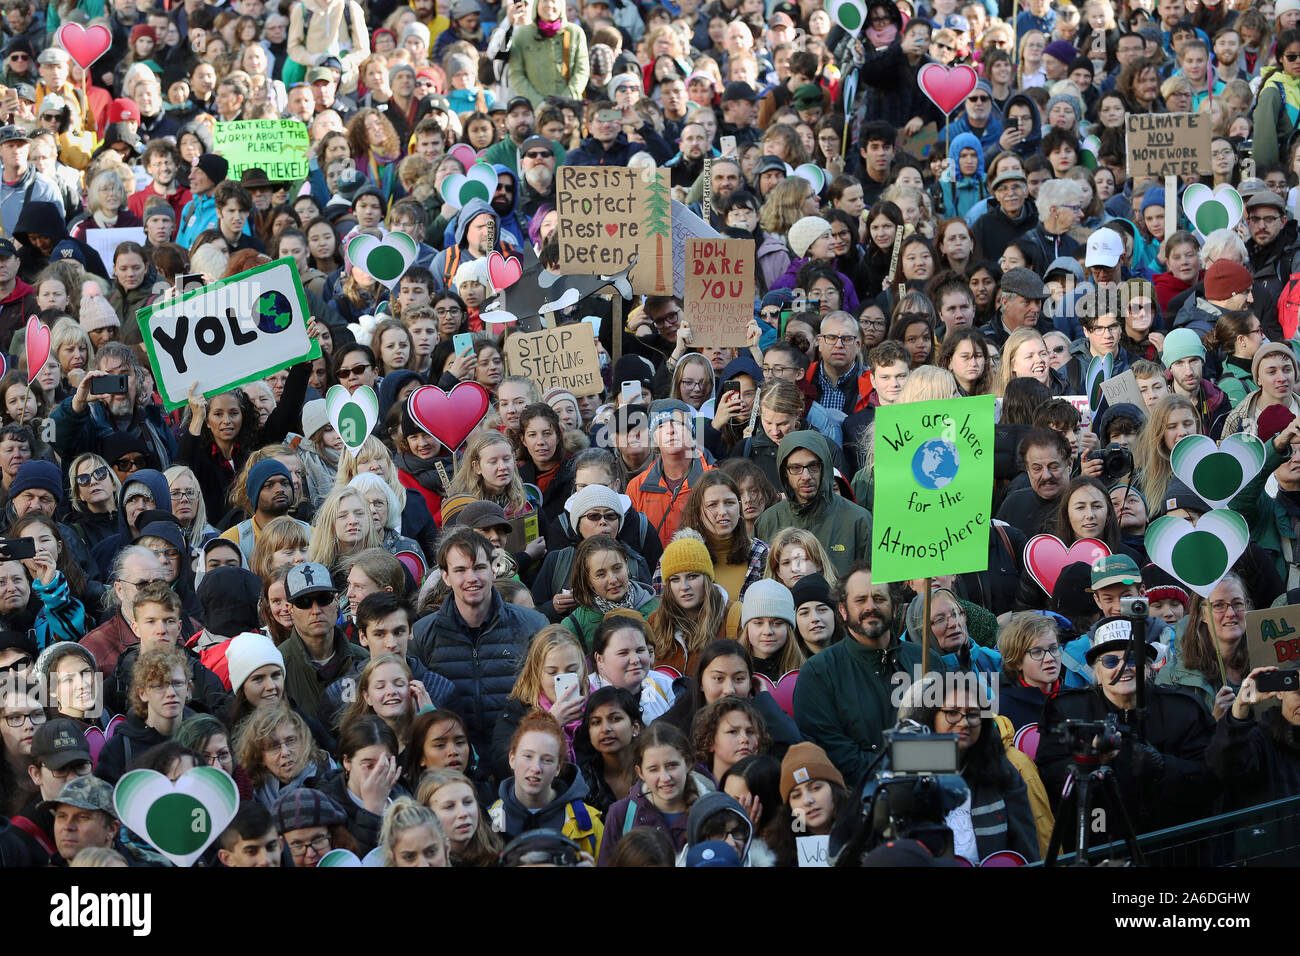 Swedish teen activist Greta Thunberg joins for the post federal election Friday climate strike march starting and ending at the Vancouver Art Gallery in Vancouver, British Columbia on Friday, October 25, 2019. Organized by local youth-led, Sustainabiliteens, Greta and a turn out of nearly 10,000 climate activists demand action from industry and the various levels of government and are supporting the 15-youth who announced their plans to sue the federal government alleging it has contributed to climate change. Photo by Heinz Ruckemann/UPI Stock Photo